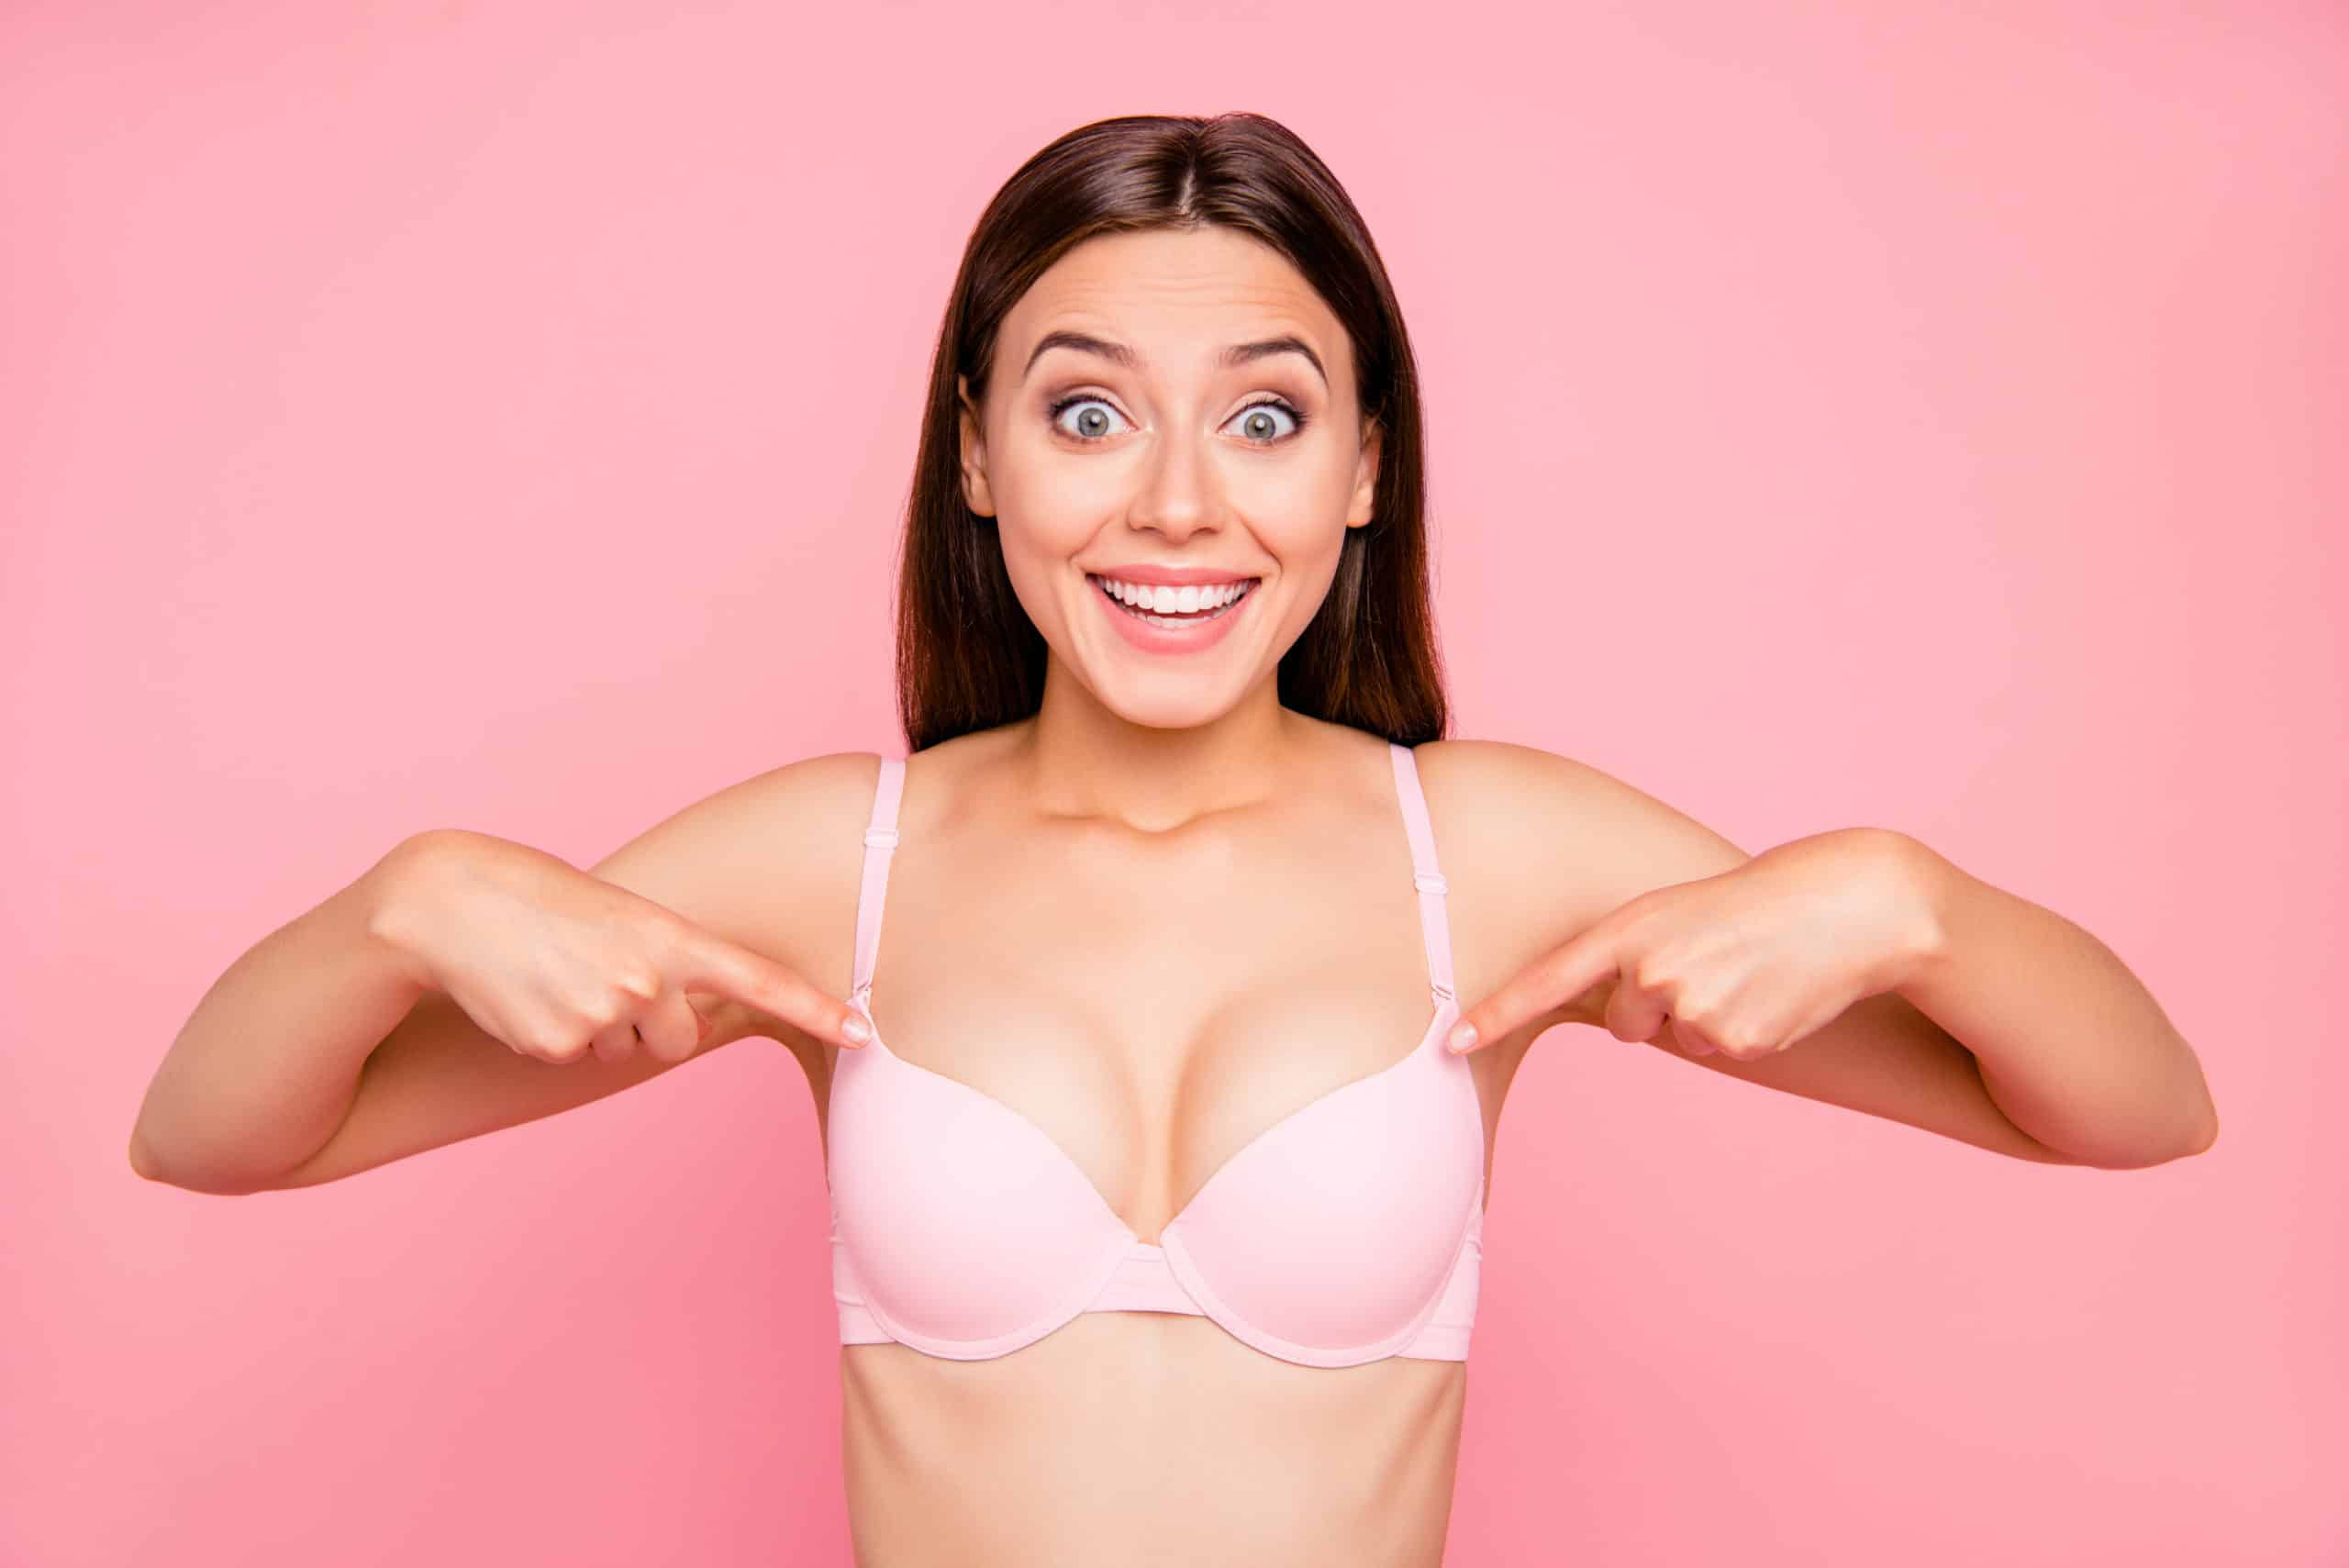 Flat chested women, you might not understand - Tehrani Plastic Surgery